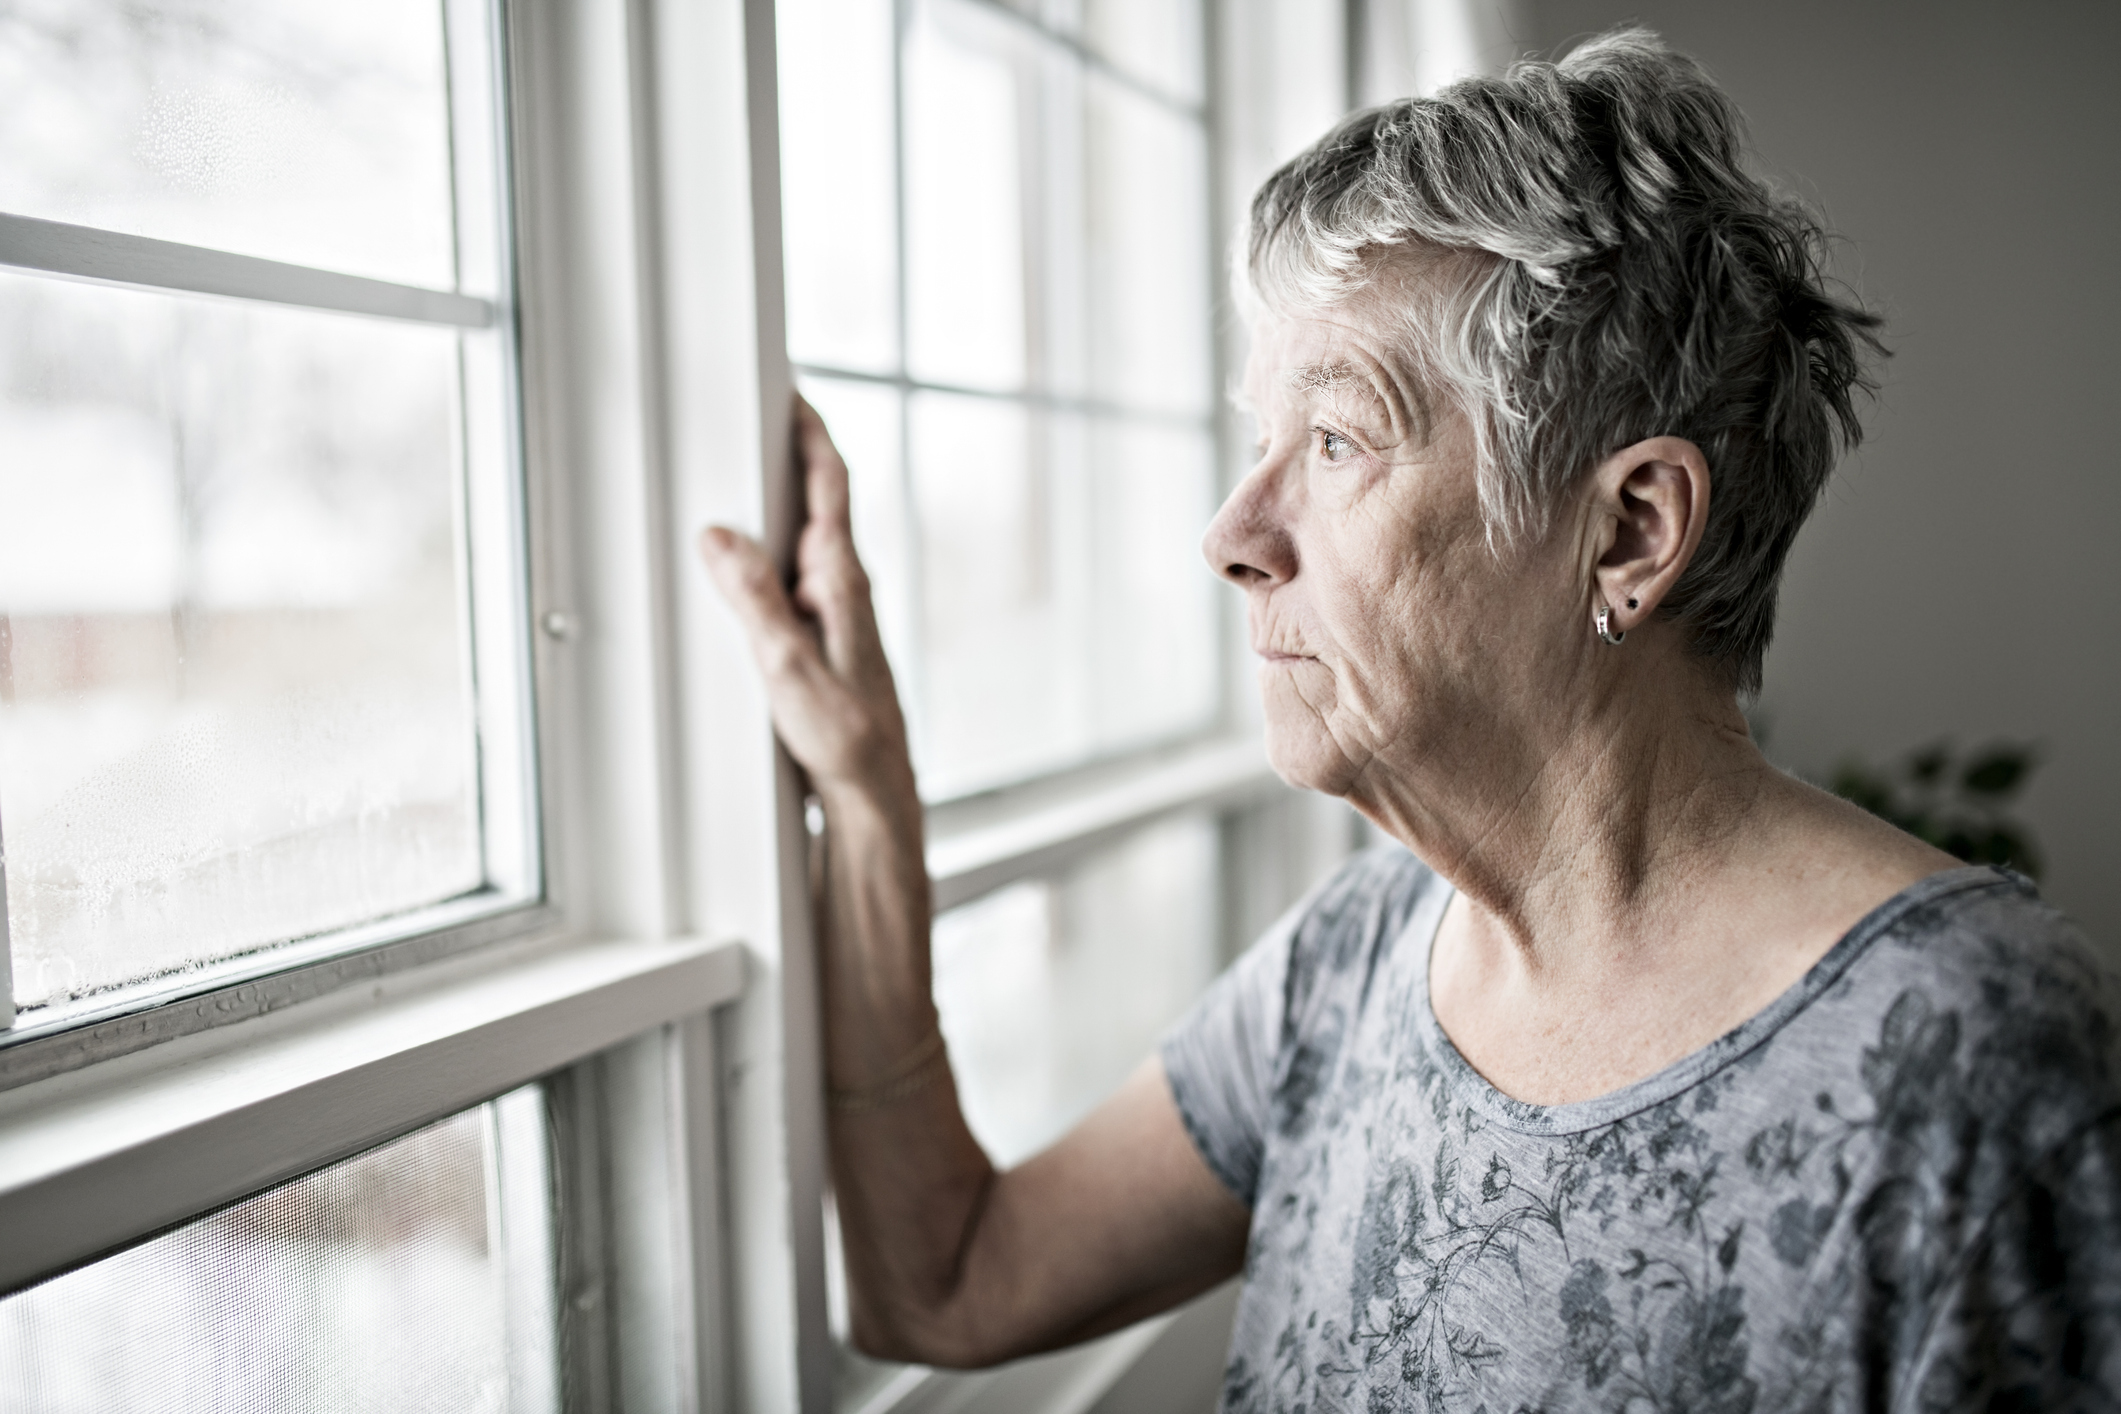 A Sad and lonely 60 years old senior in is apartment (istock photo)